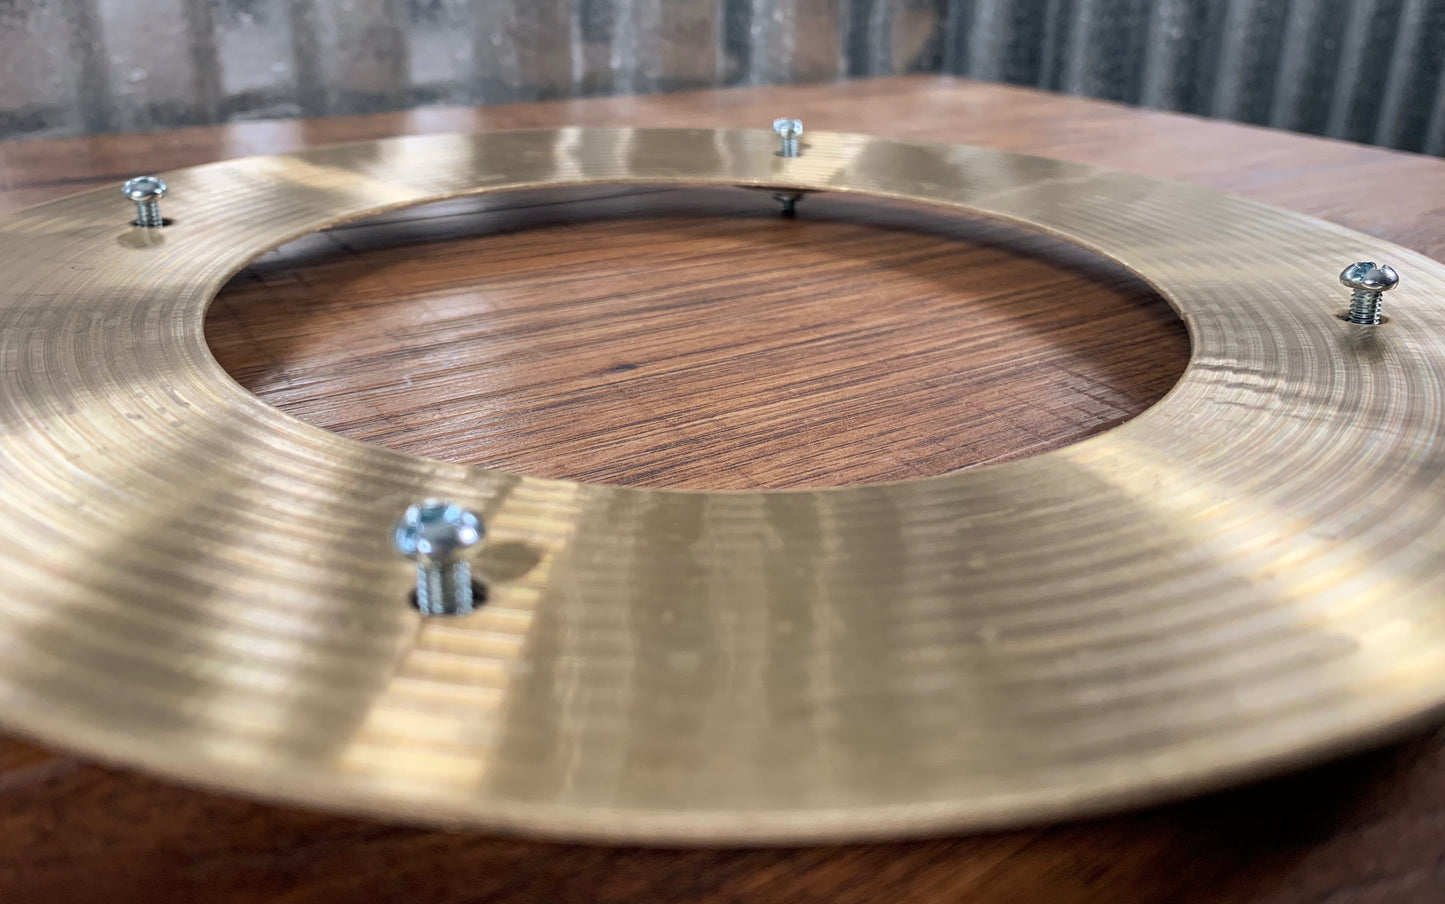 Dream Cymbals REFX-CC10 Recycled RE-FX Series Scott Pellegrom 10" Crop Circle with Jingles Demo